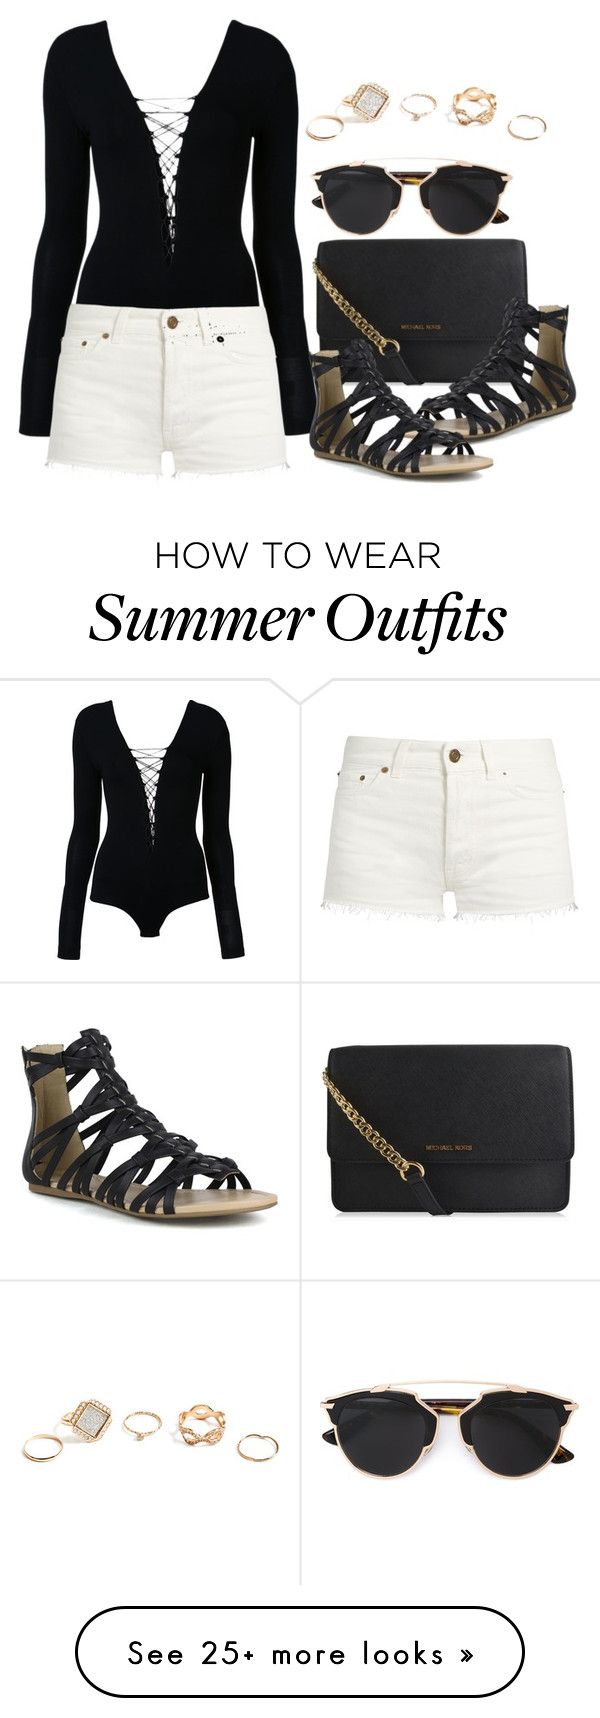 "Outfit for a music festival in summer" by stellastellahankinson on Po...